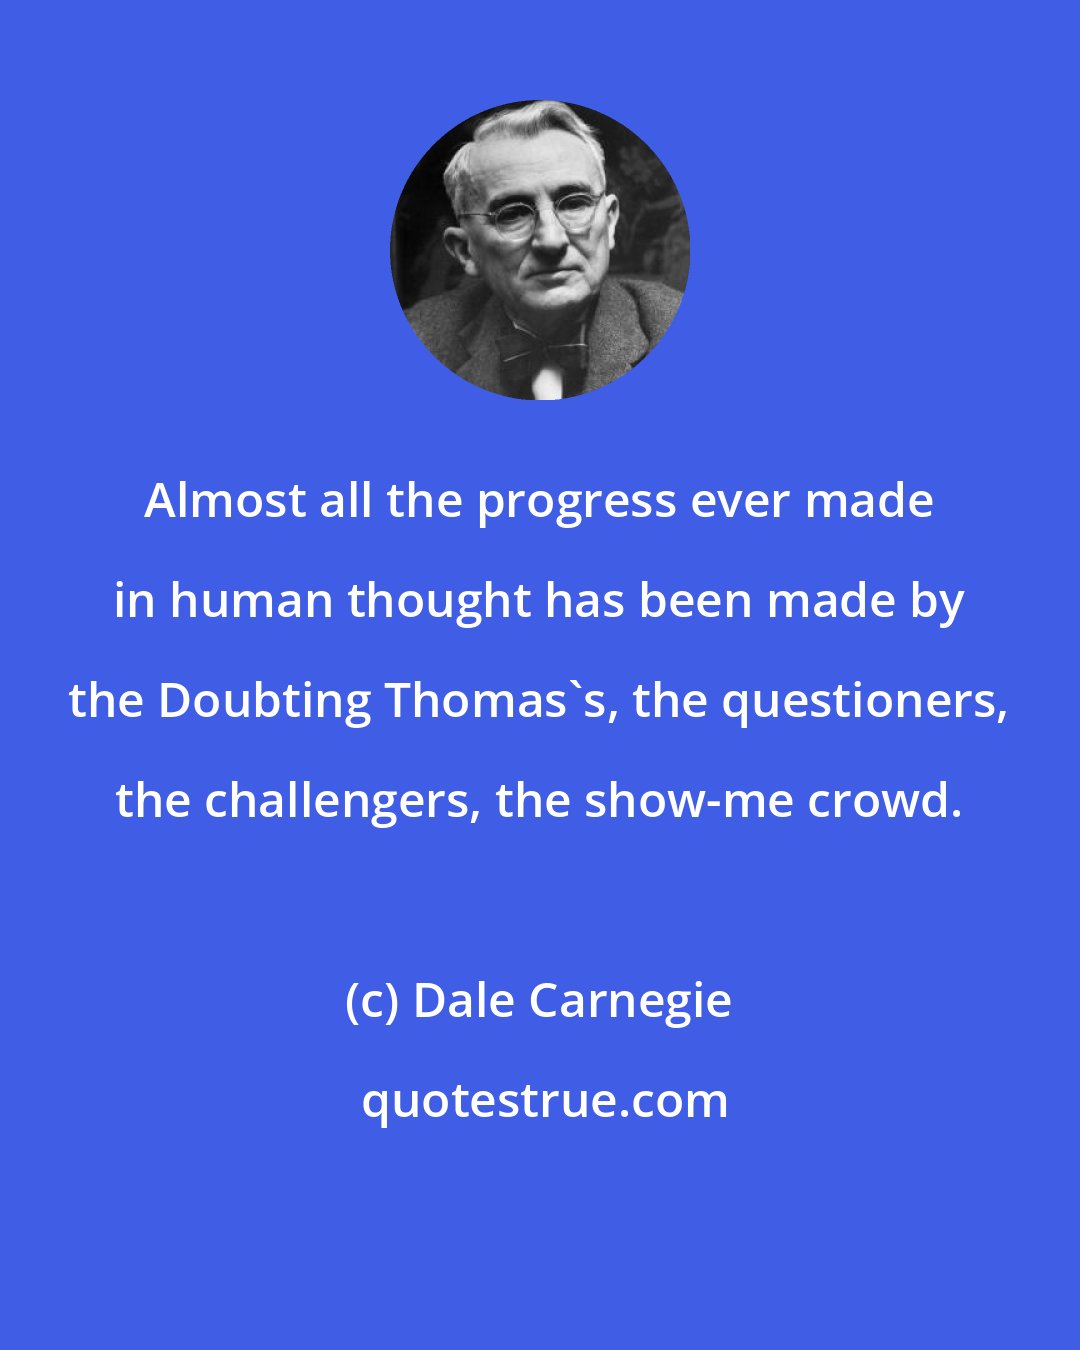 Dale Carnegie: Almost all the progress ever made in human thought has been made by the Doubting Thomas's, the questioners, the challengers, the show-me crowd.